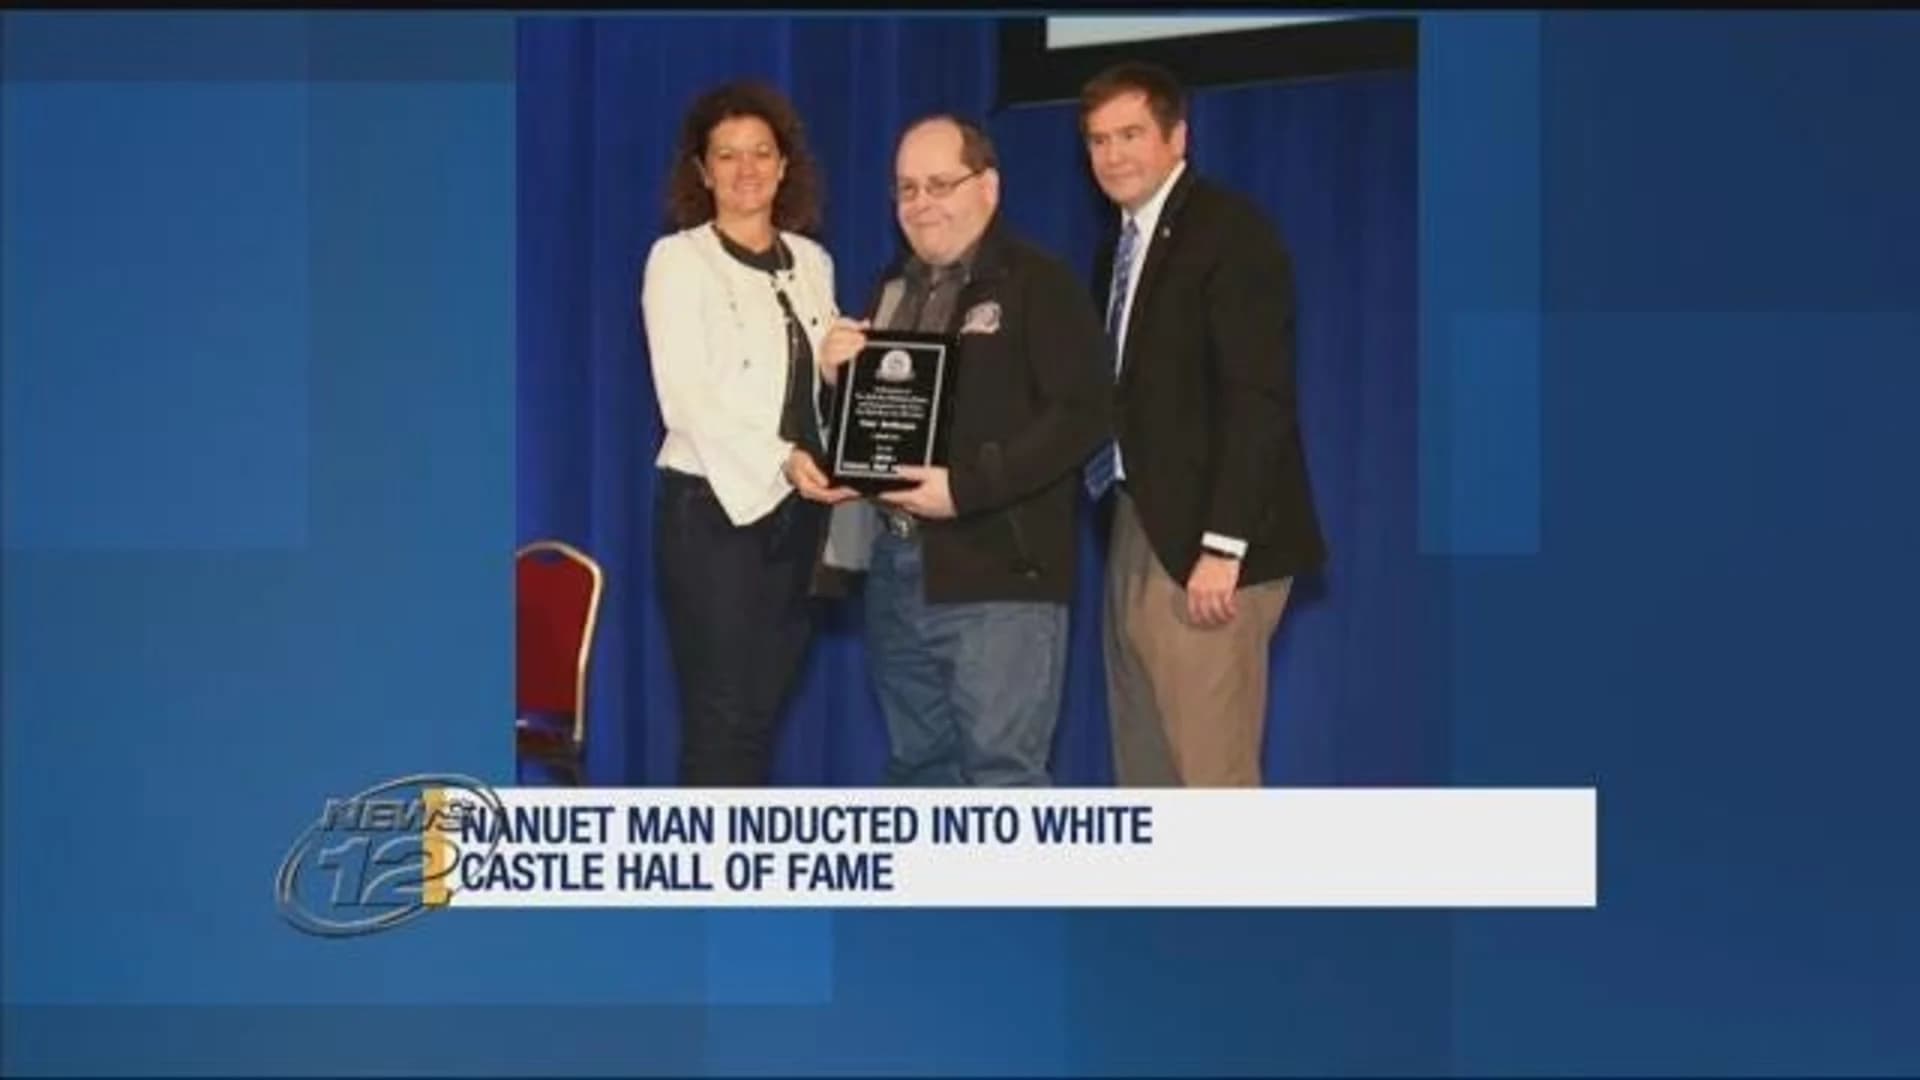 Nanuet man inducted into the White Castle Cravers Hall of Fame